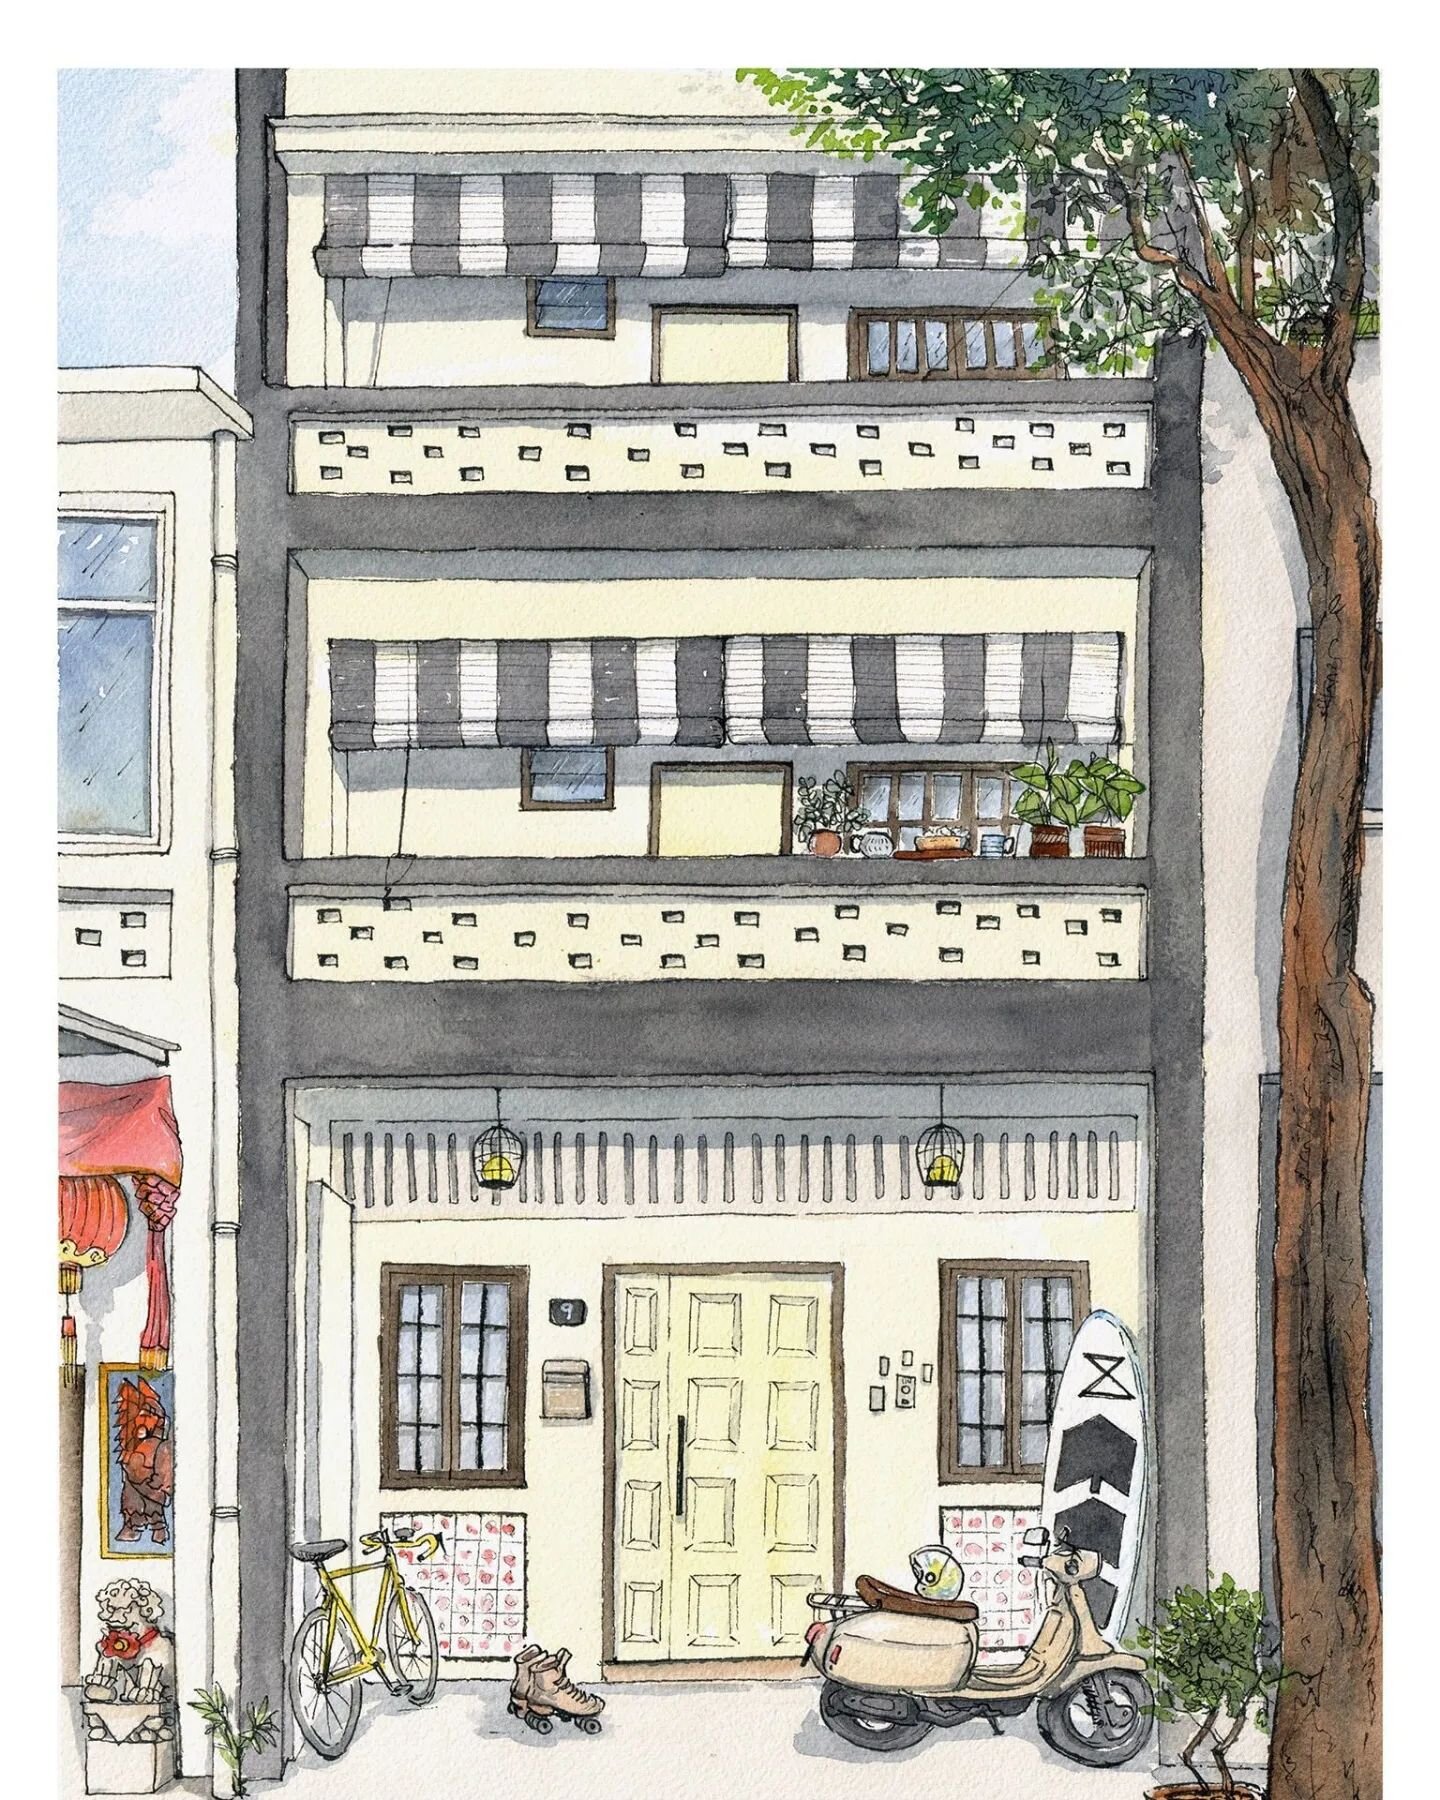 Just did a Rental Handover of a unit at a Conservation Shophouse.

To my sheer surprise, this Outgoing tenant shared this beautiful hand drawn painting of the unit.

This painting is simply gorgeous !!!